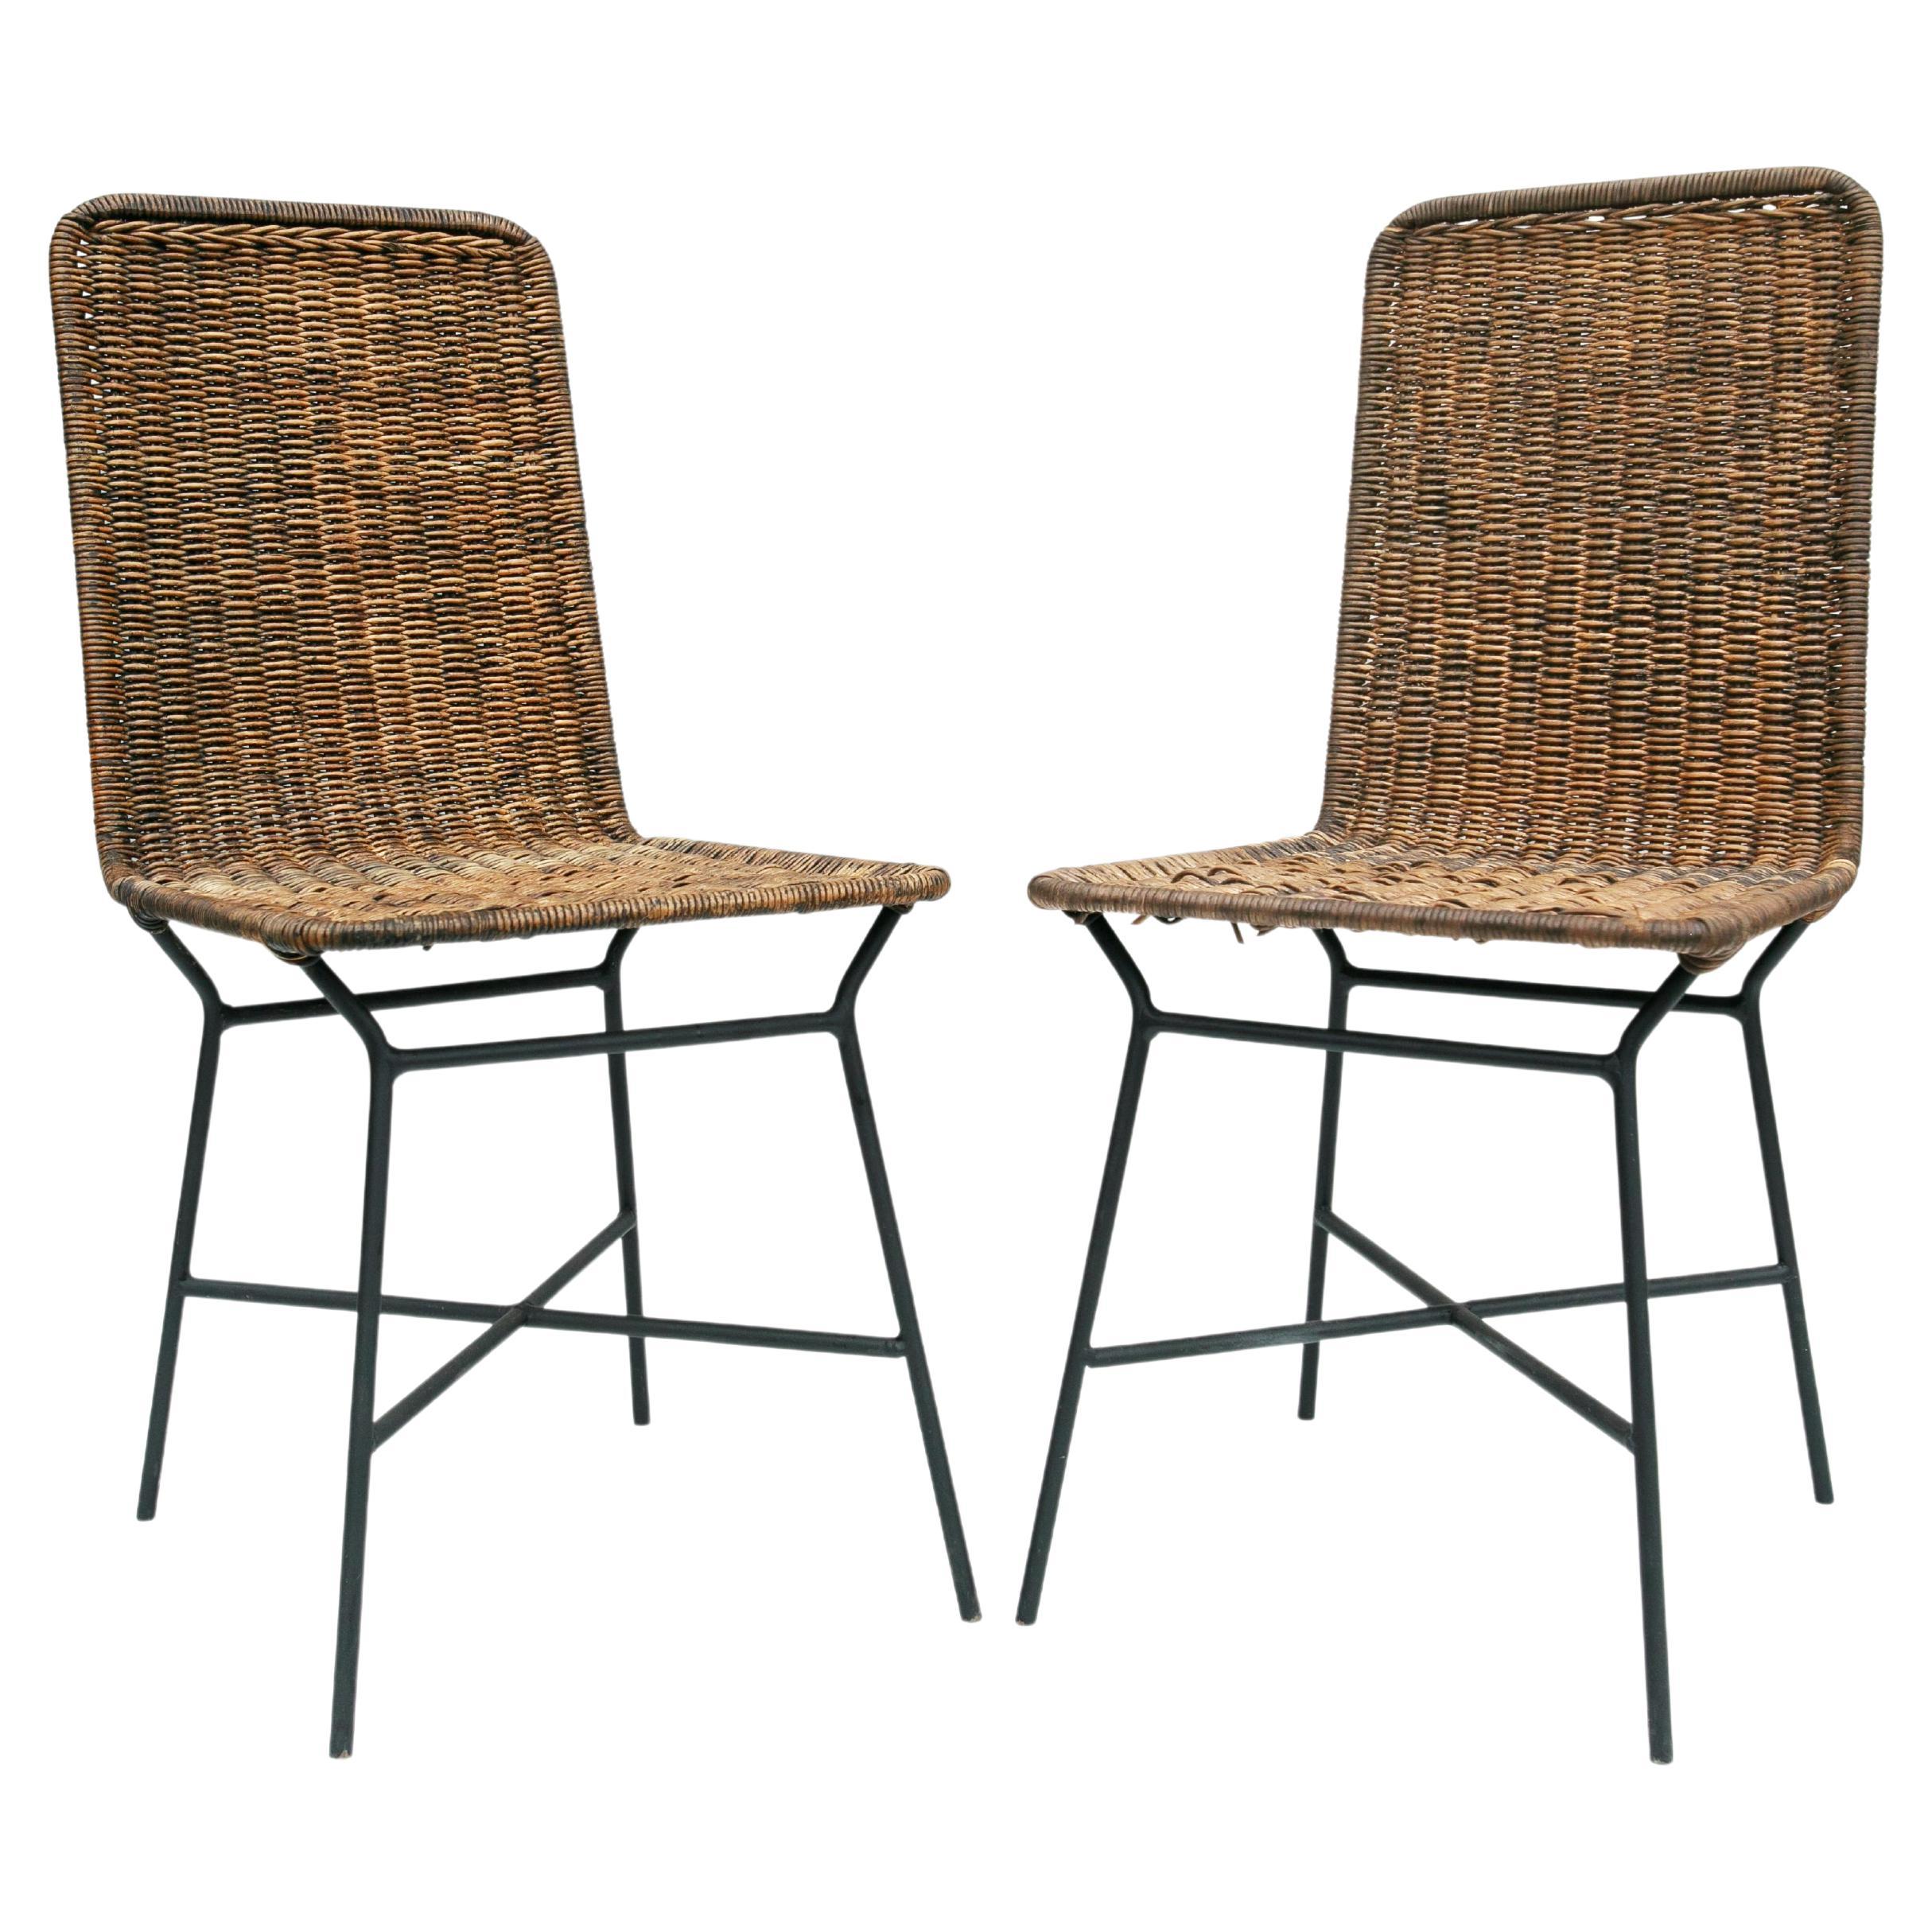 Brazilian Modern Chairs in Caning and Metal by Carlo Hauner, 1950s, Brazil